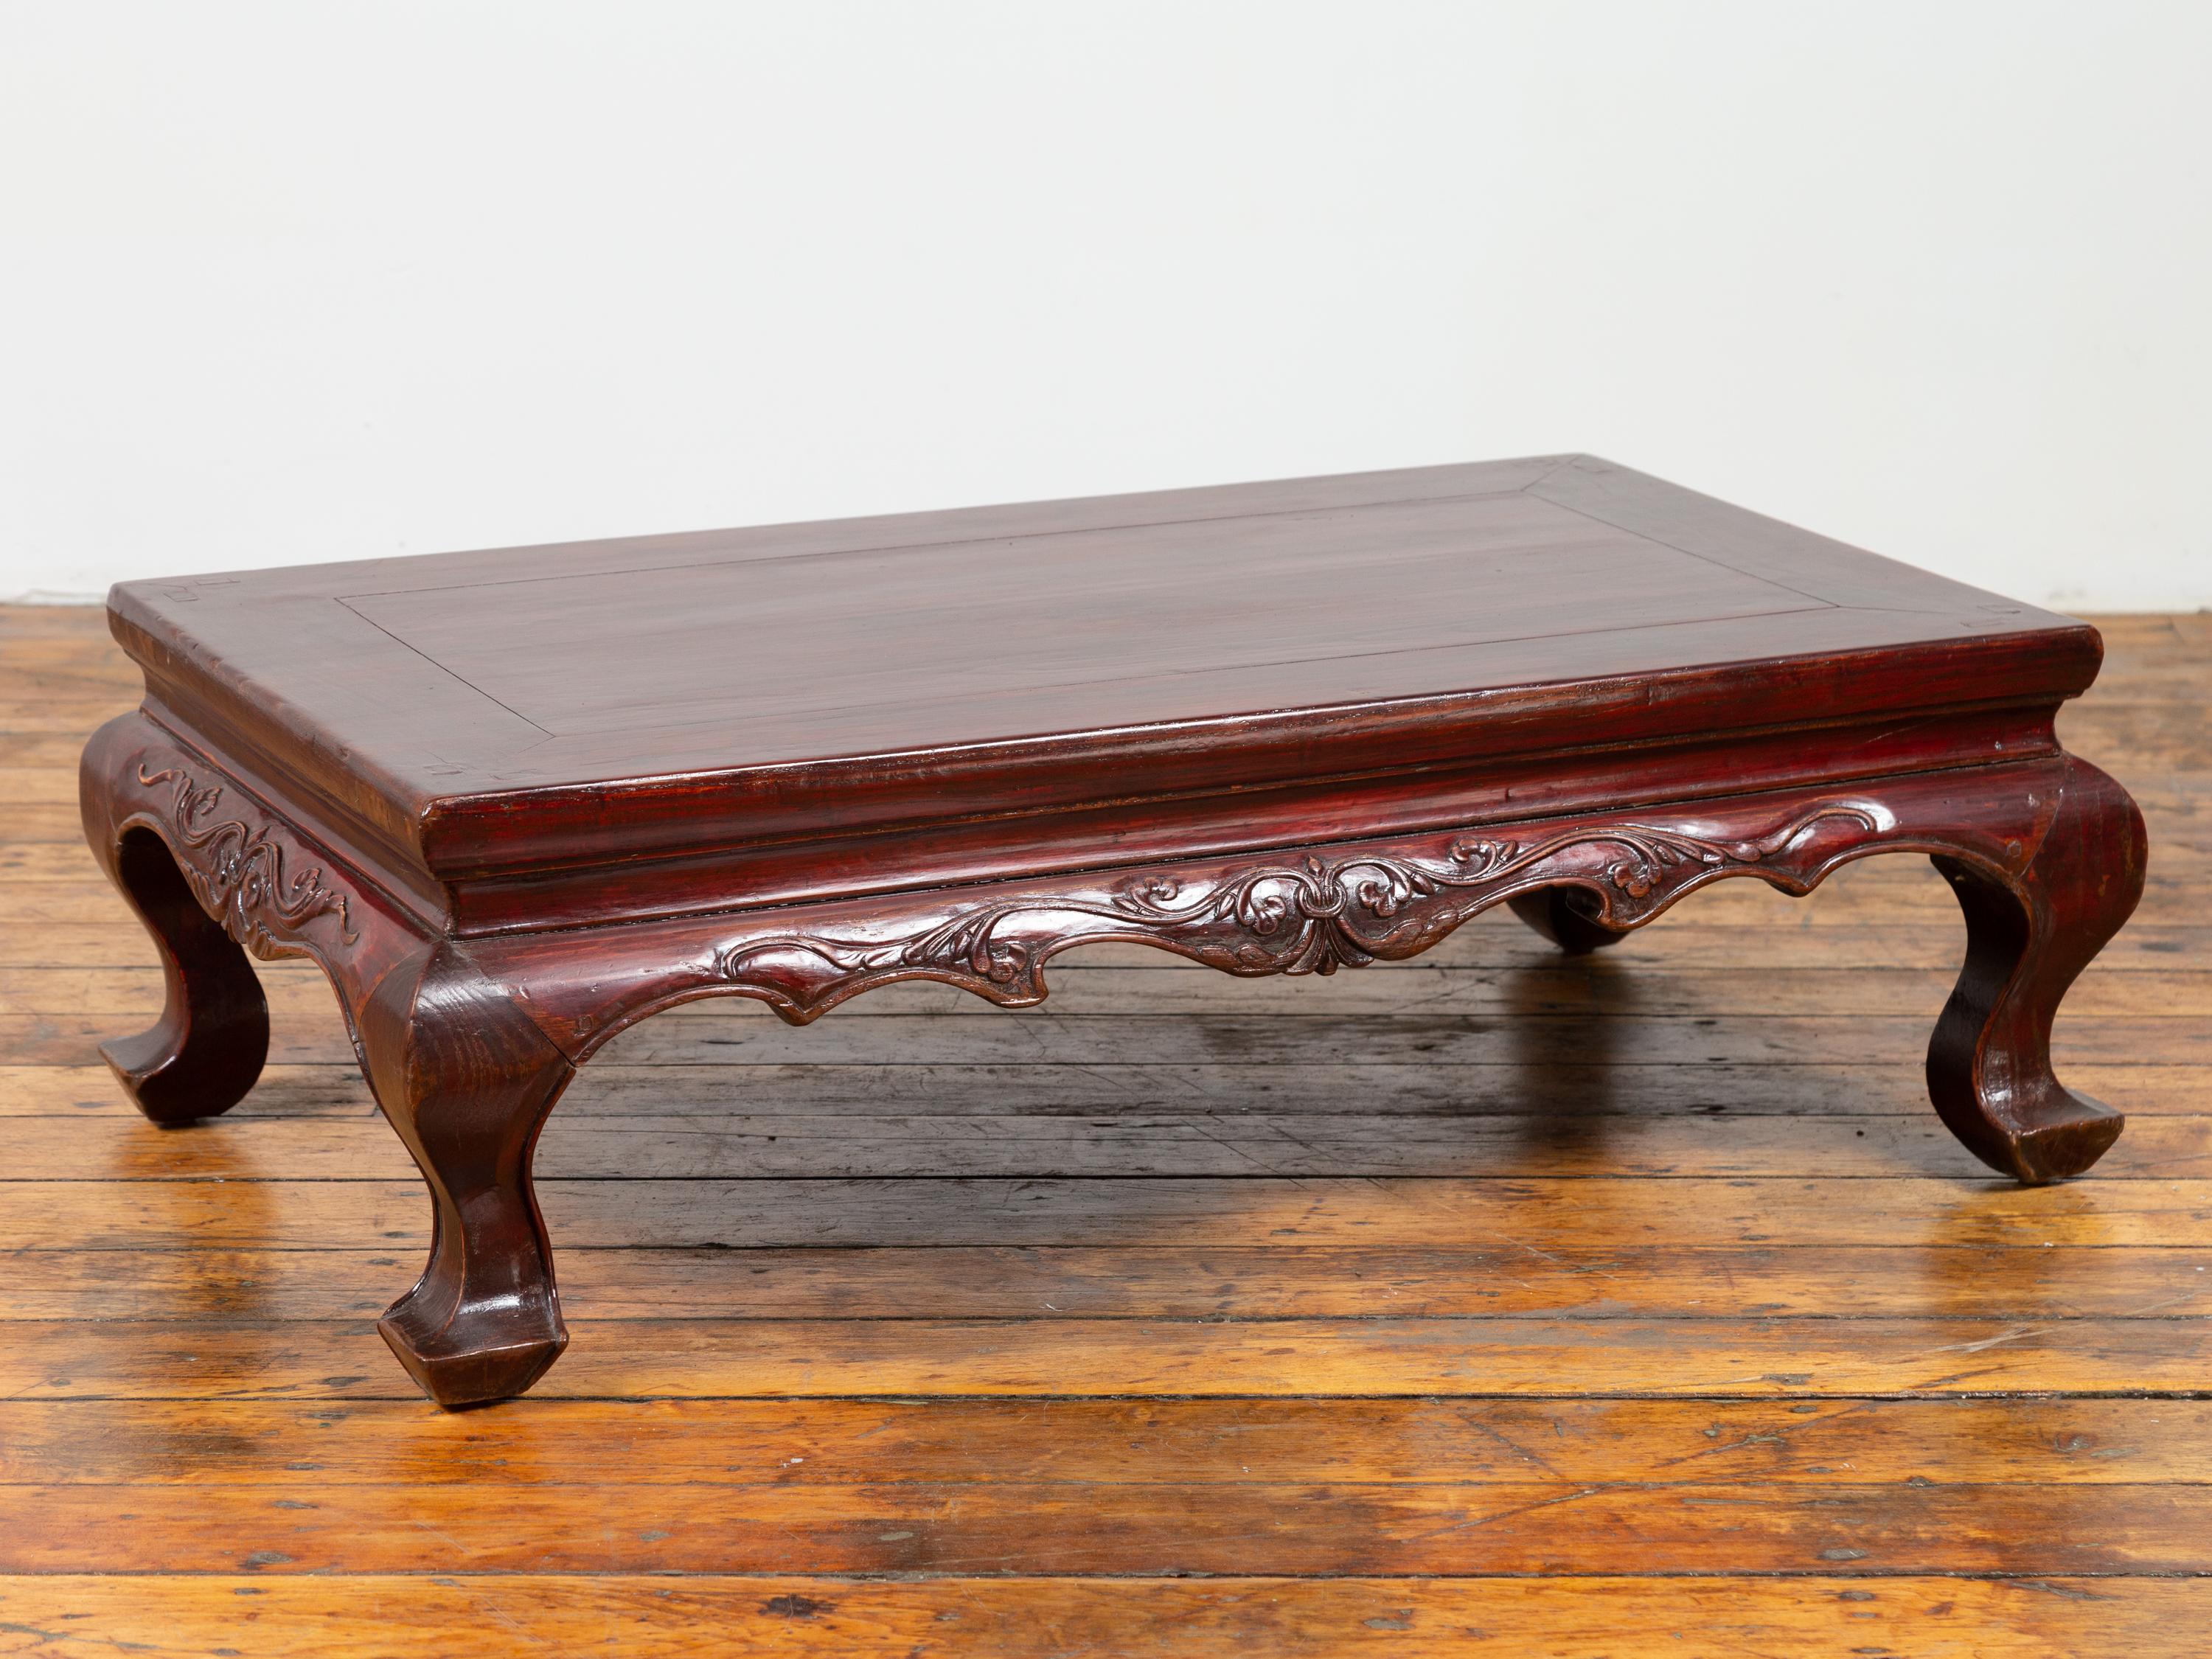 Chinese Qing Dynasty 19th Century Lacquered Wood Low Table with Cabriole Legs For Sale 1